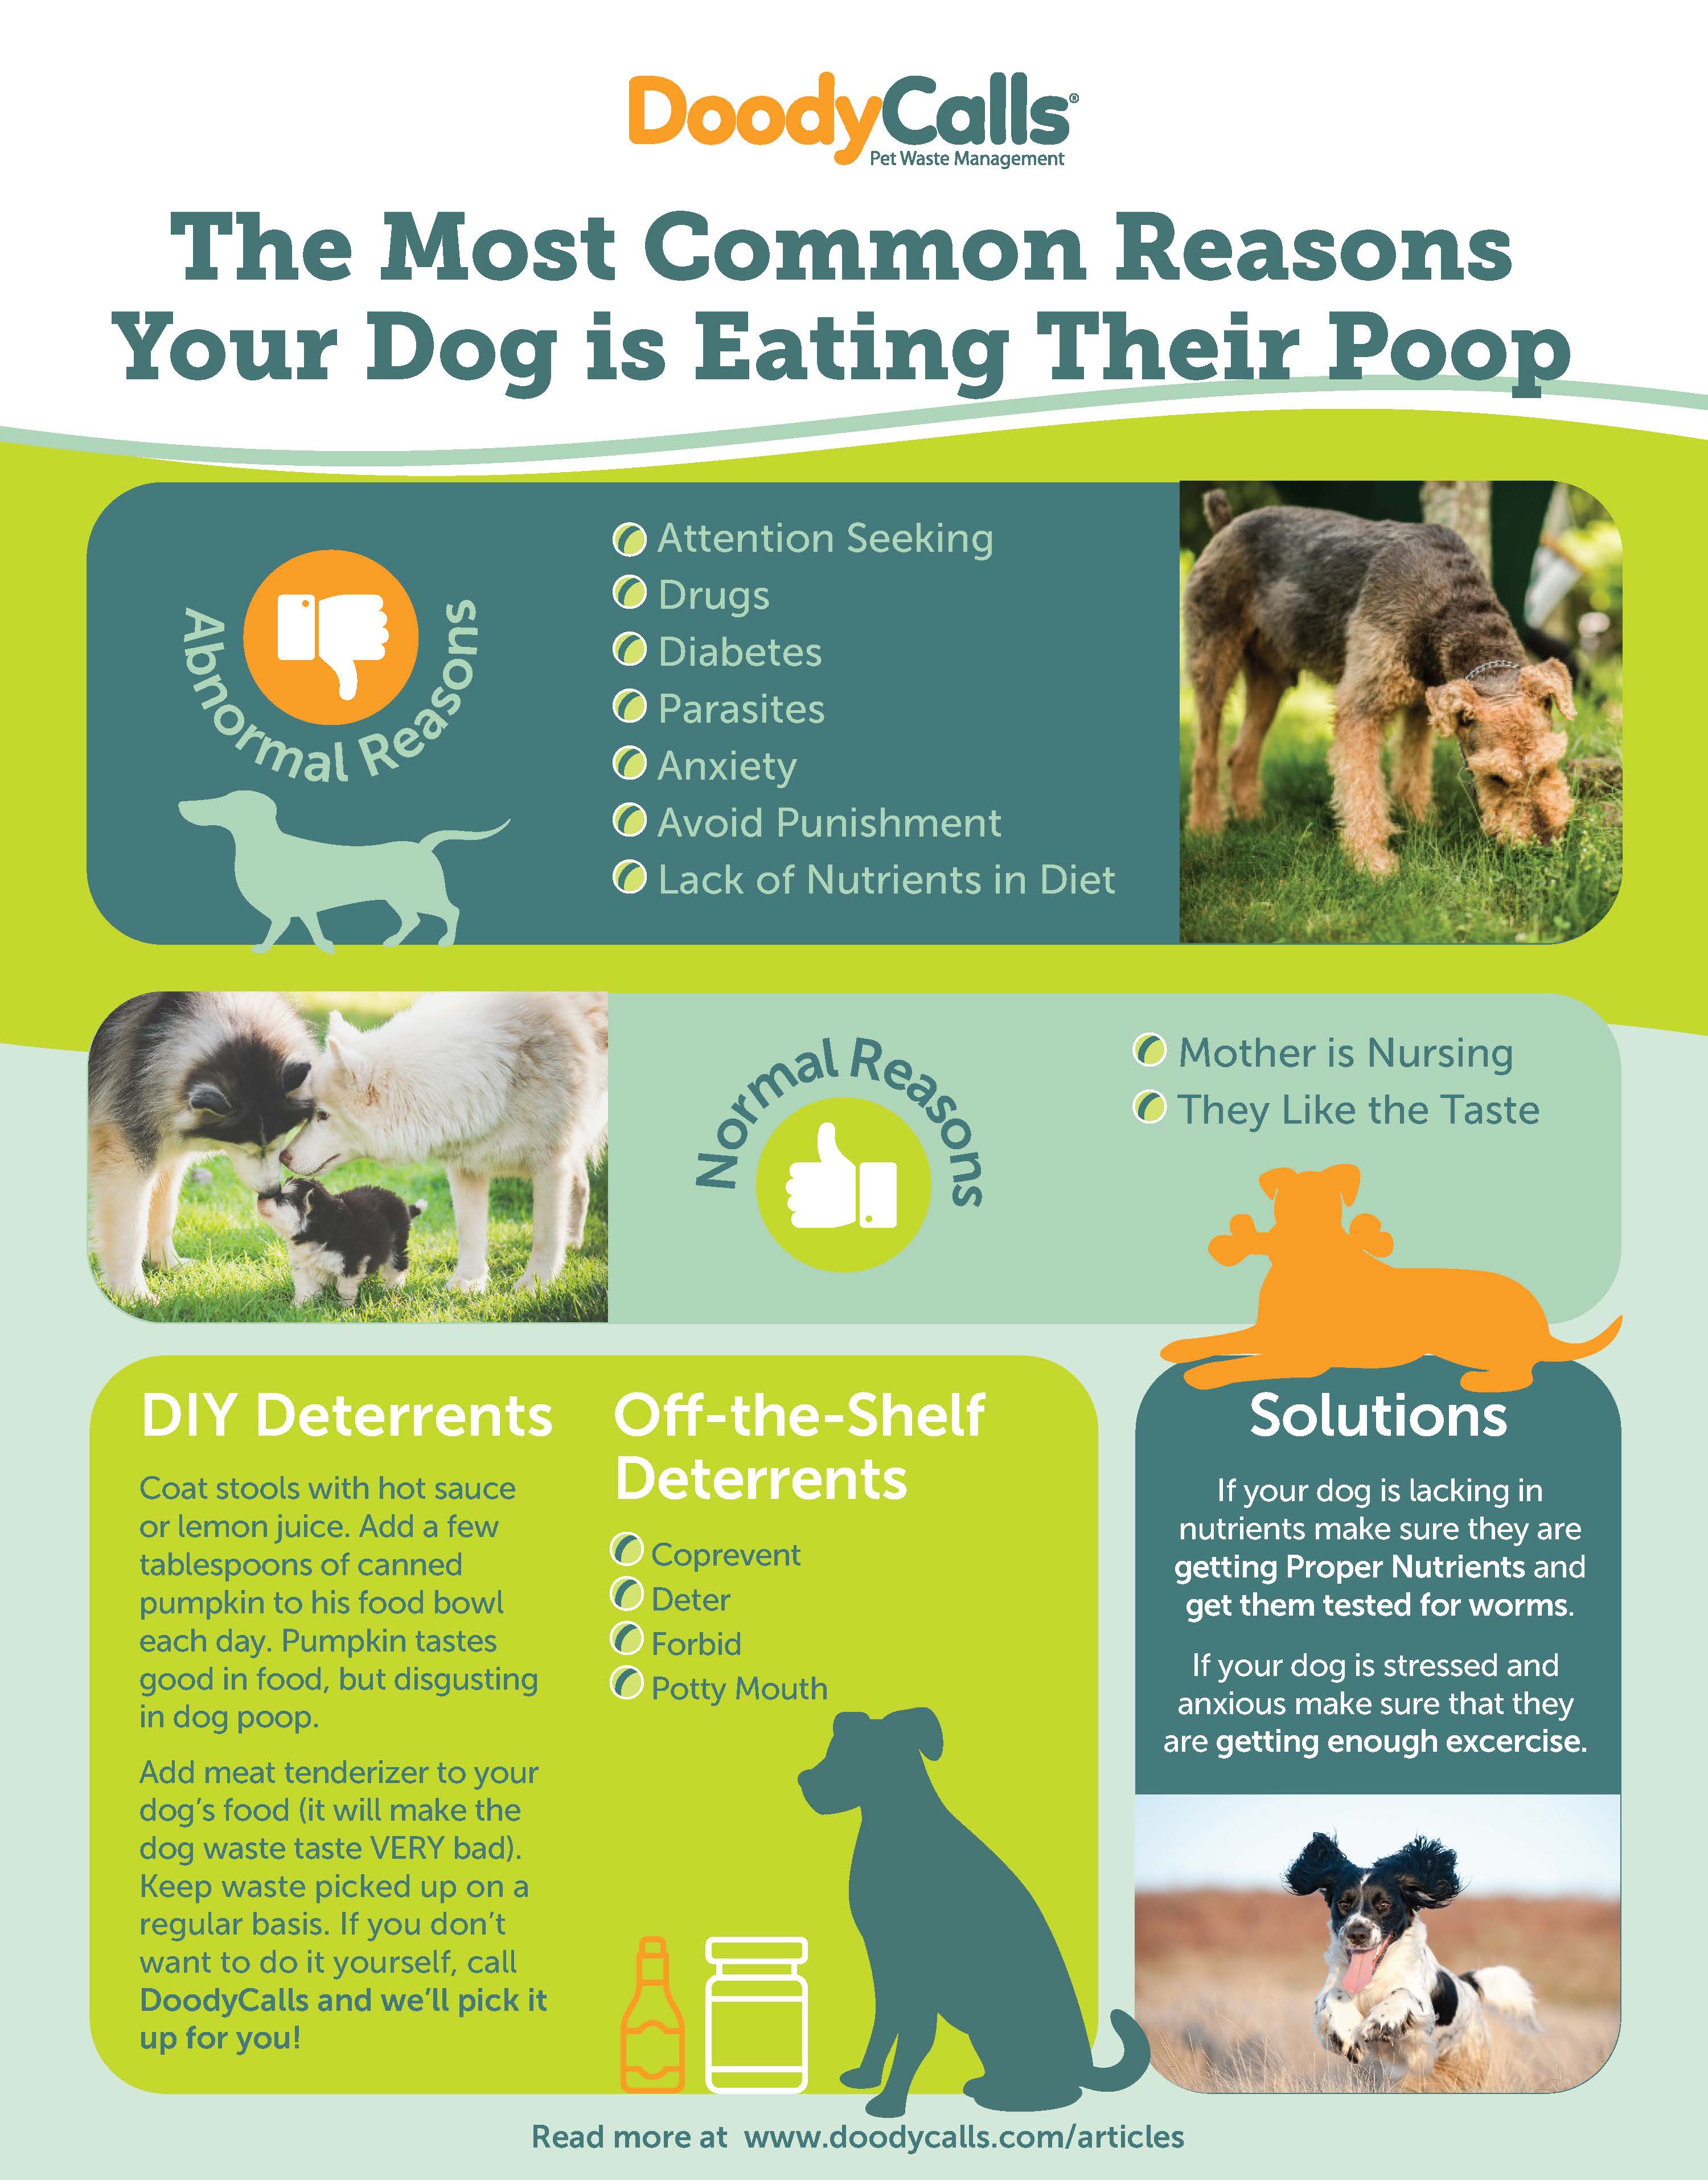 The Most Common Reasons Your Dog is Eating Their Poop